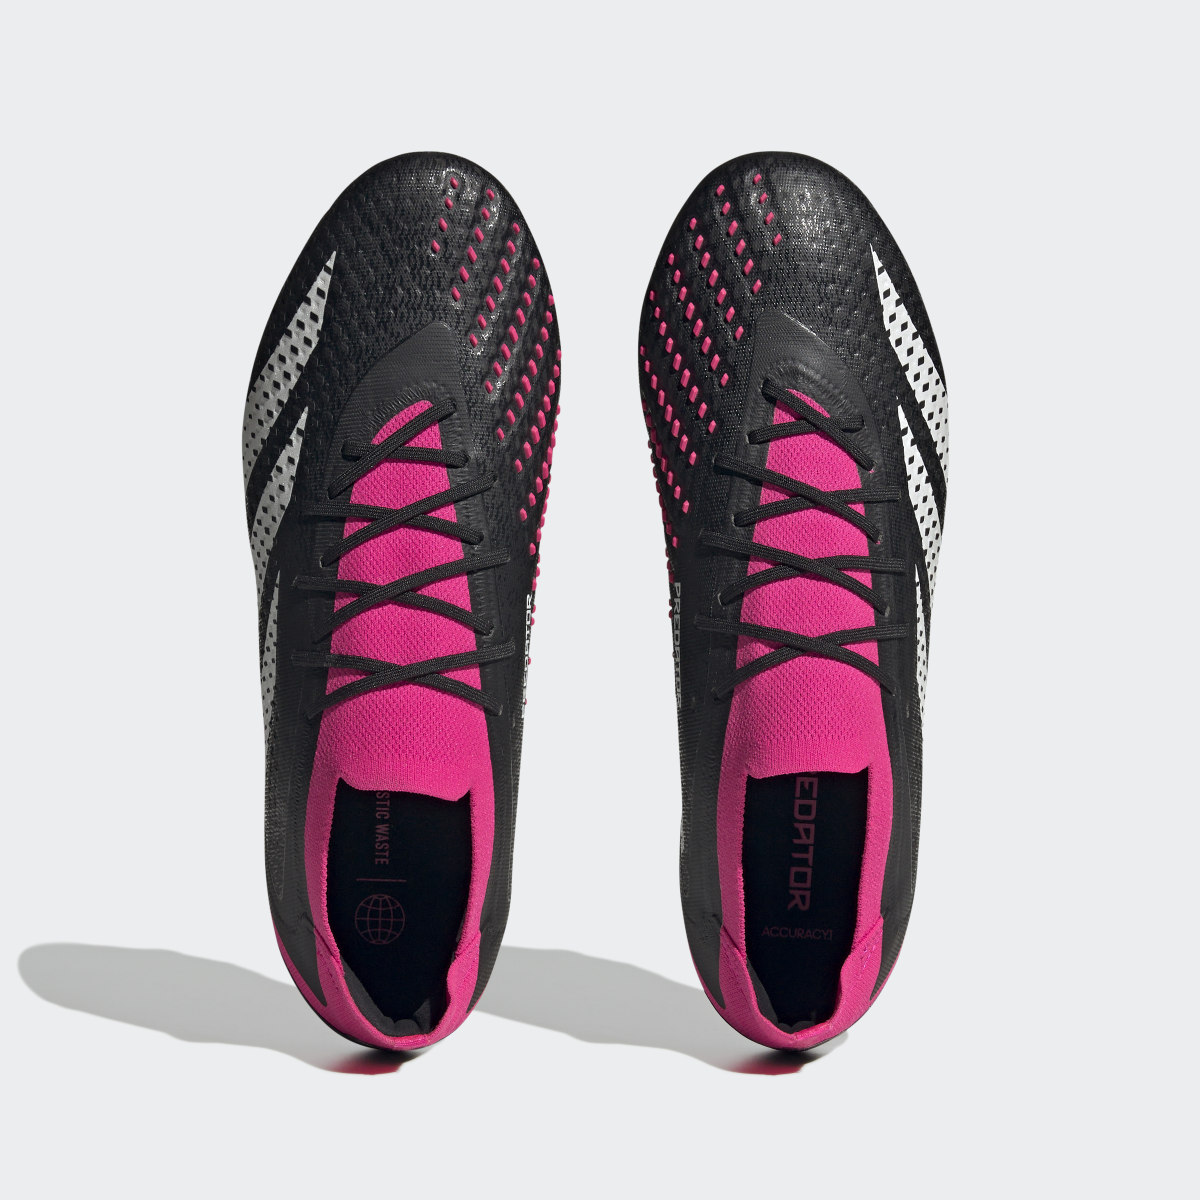 Adidas Predator Accuracy.1 Low Firm Ground Boots. 7